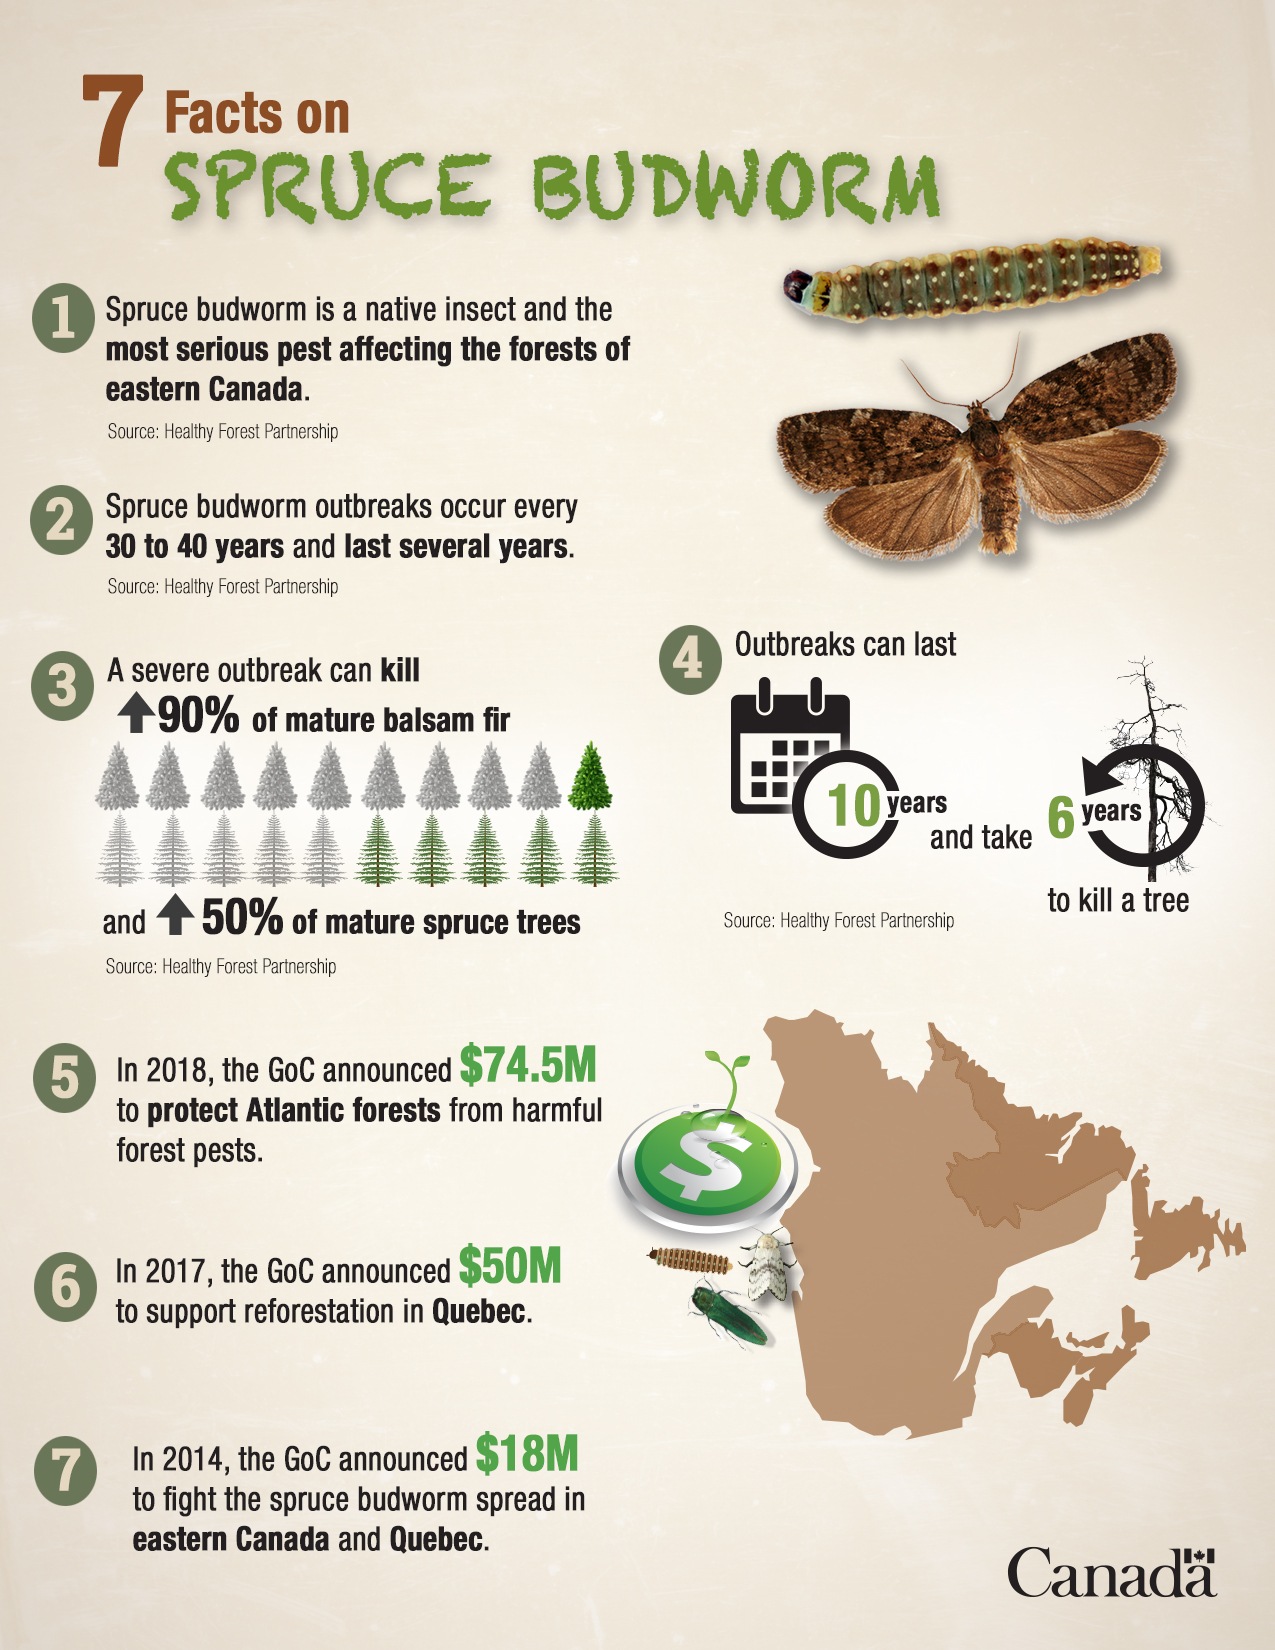 7 facts on Spruce Budworm